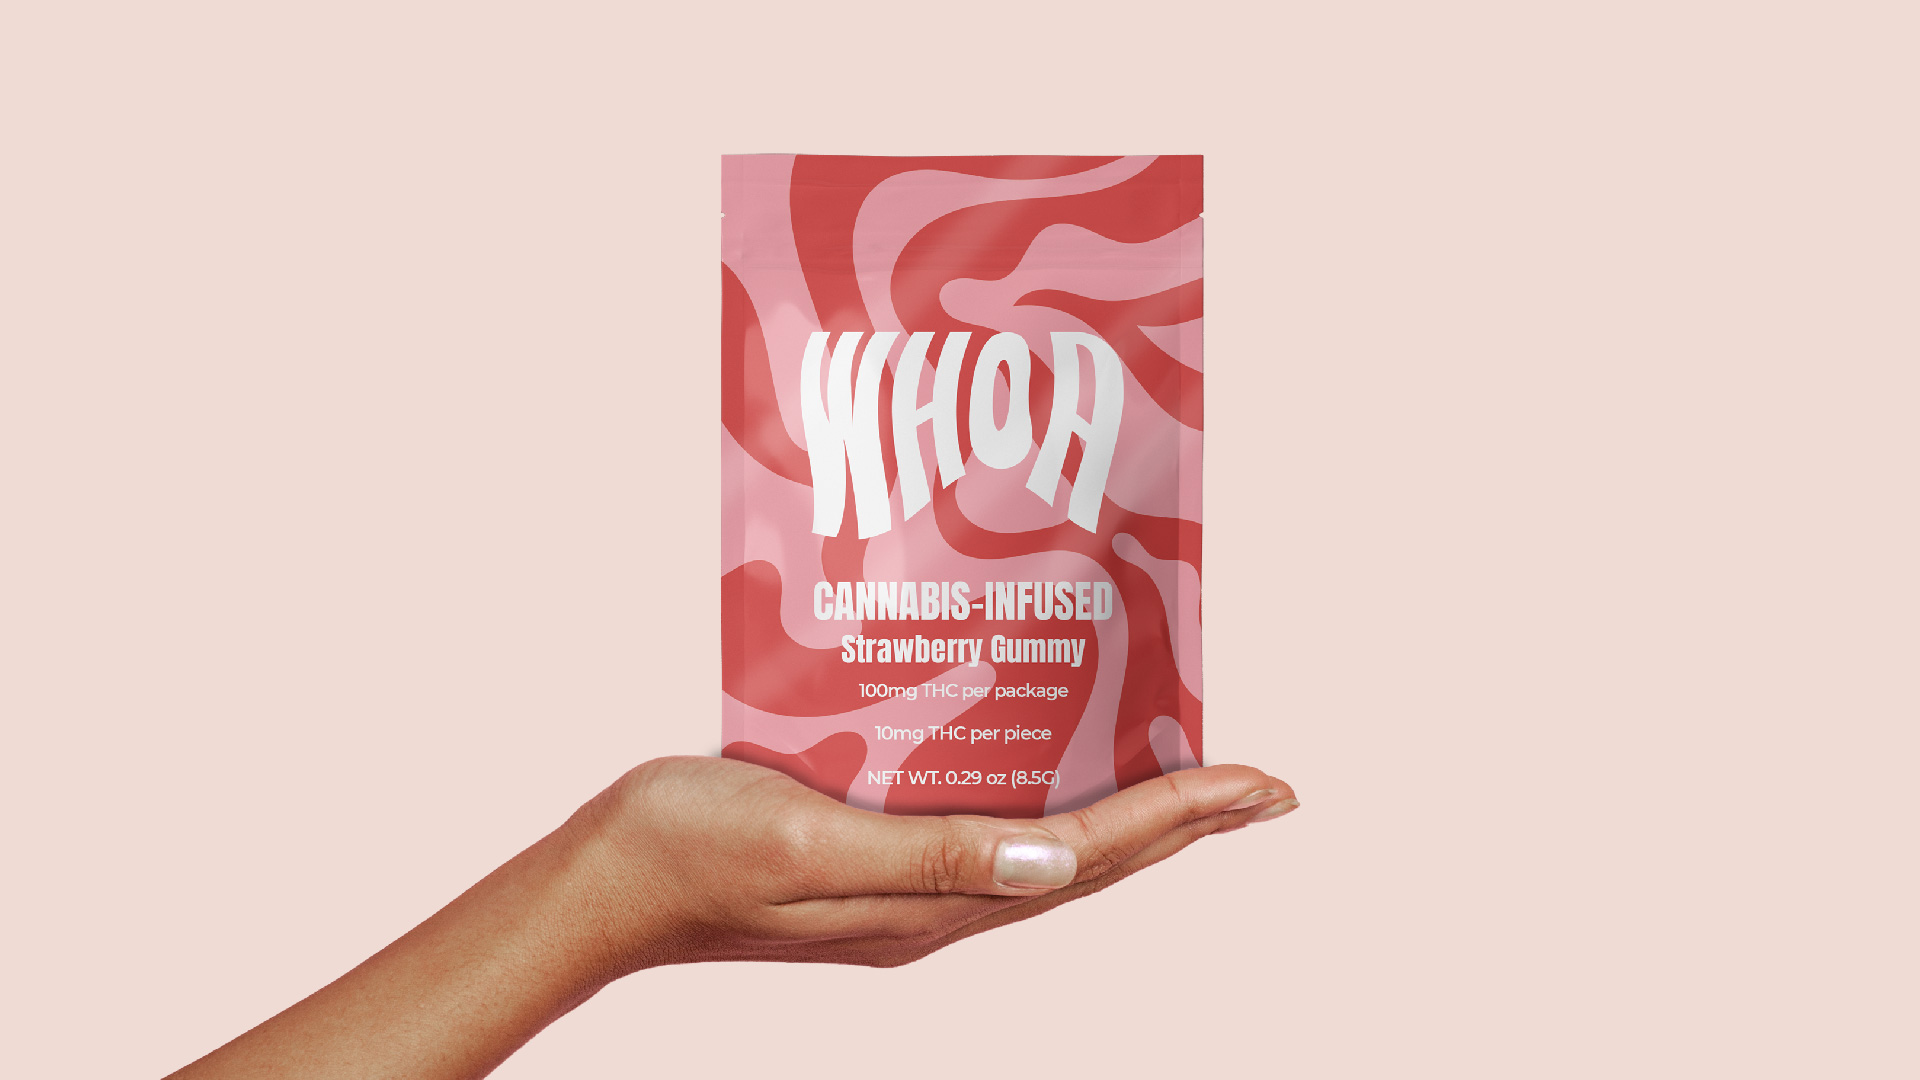 Whoa Cannabis Infused Edibles Branding and Packaging